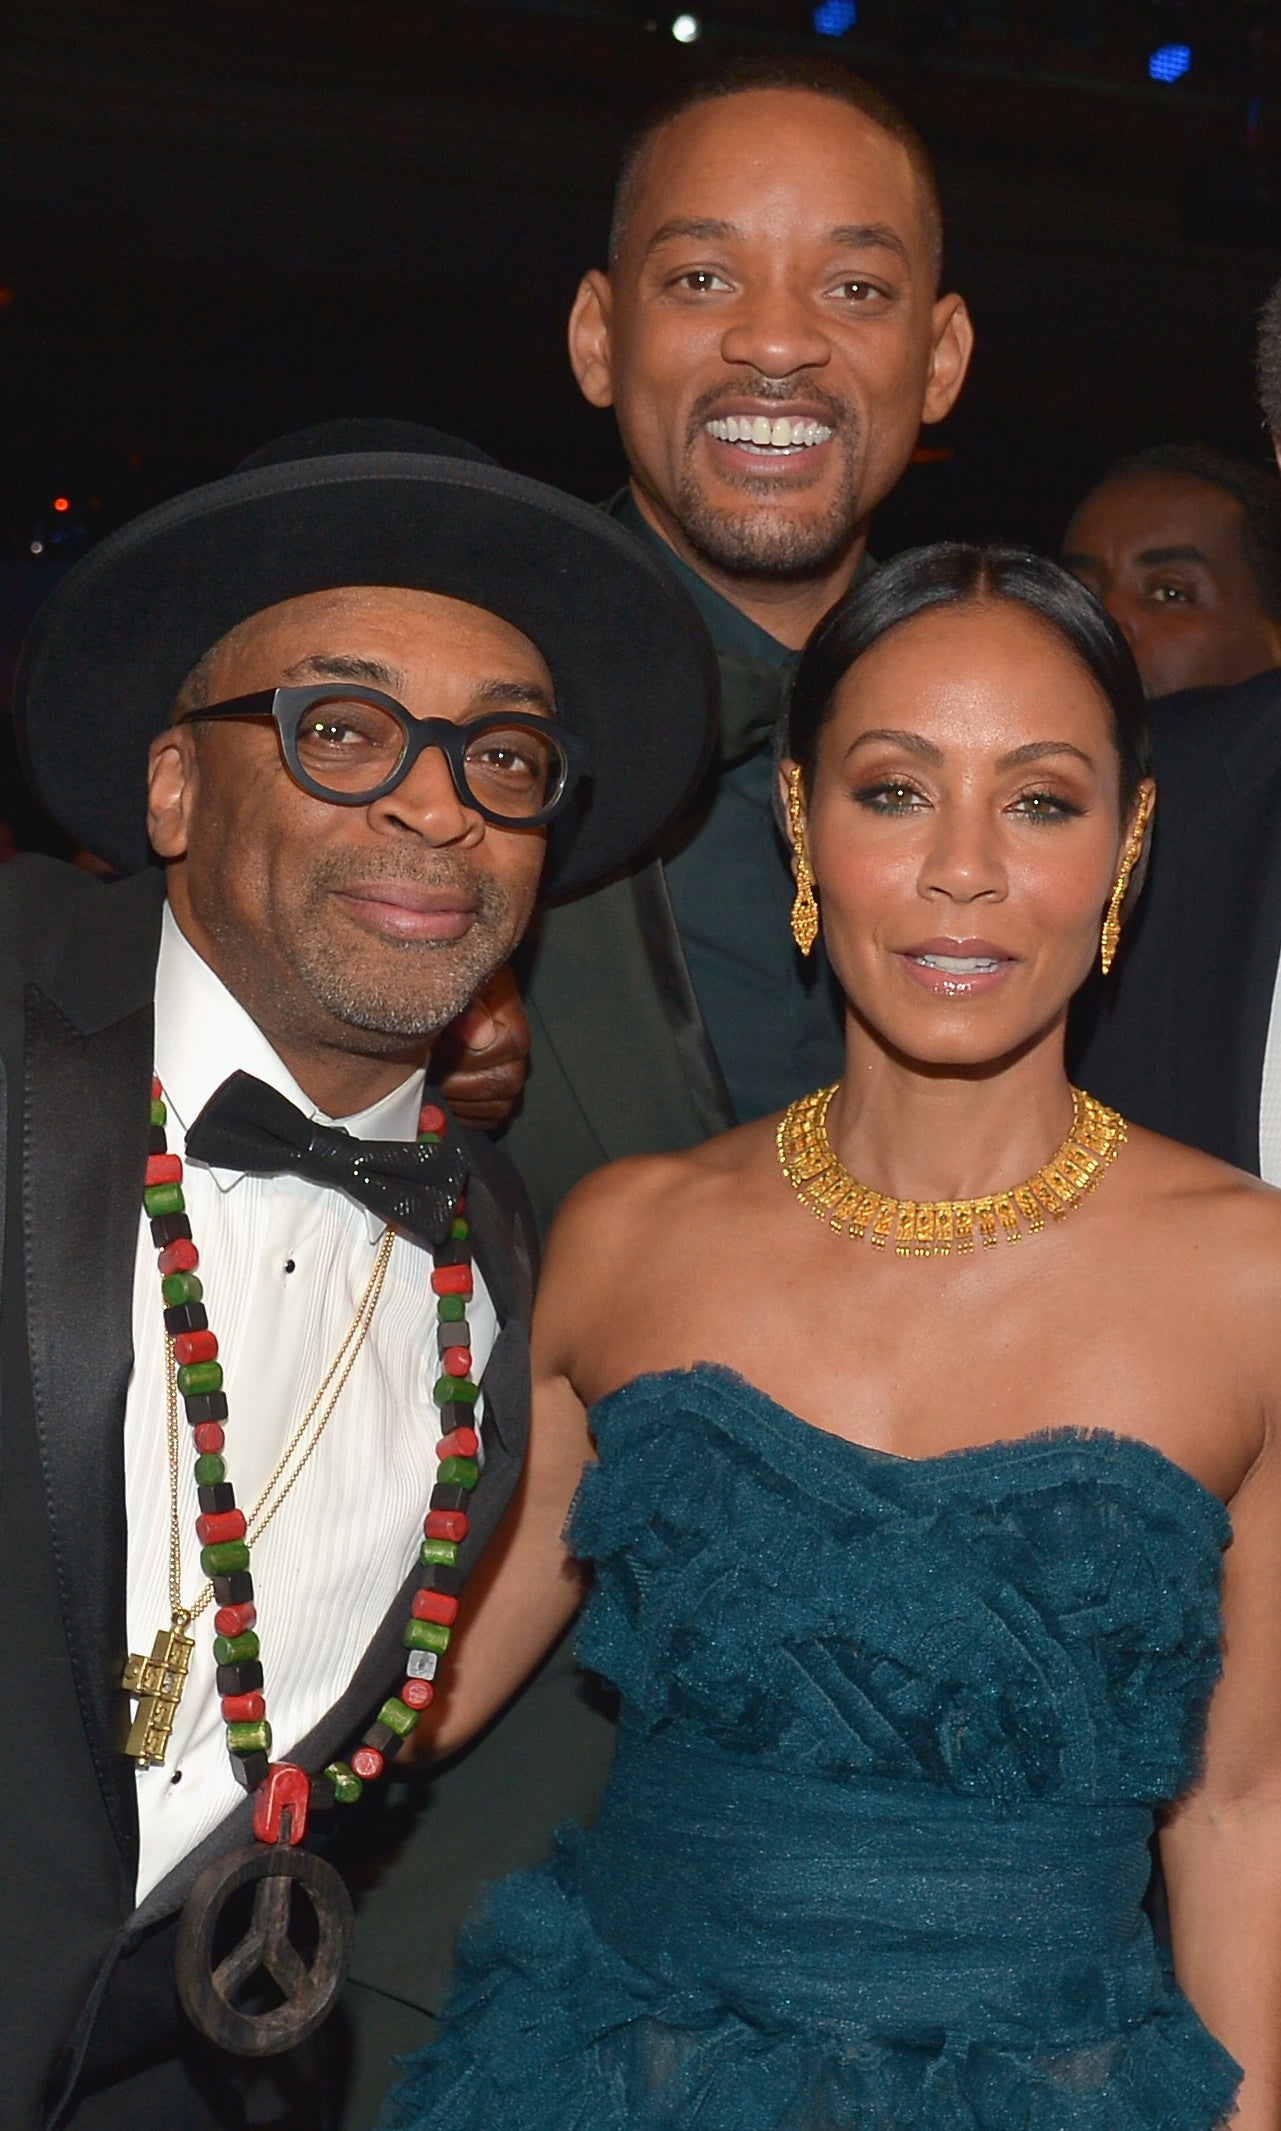 Jada, Will, and Spike at an event